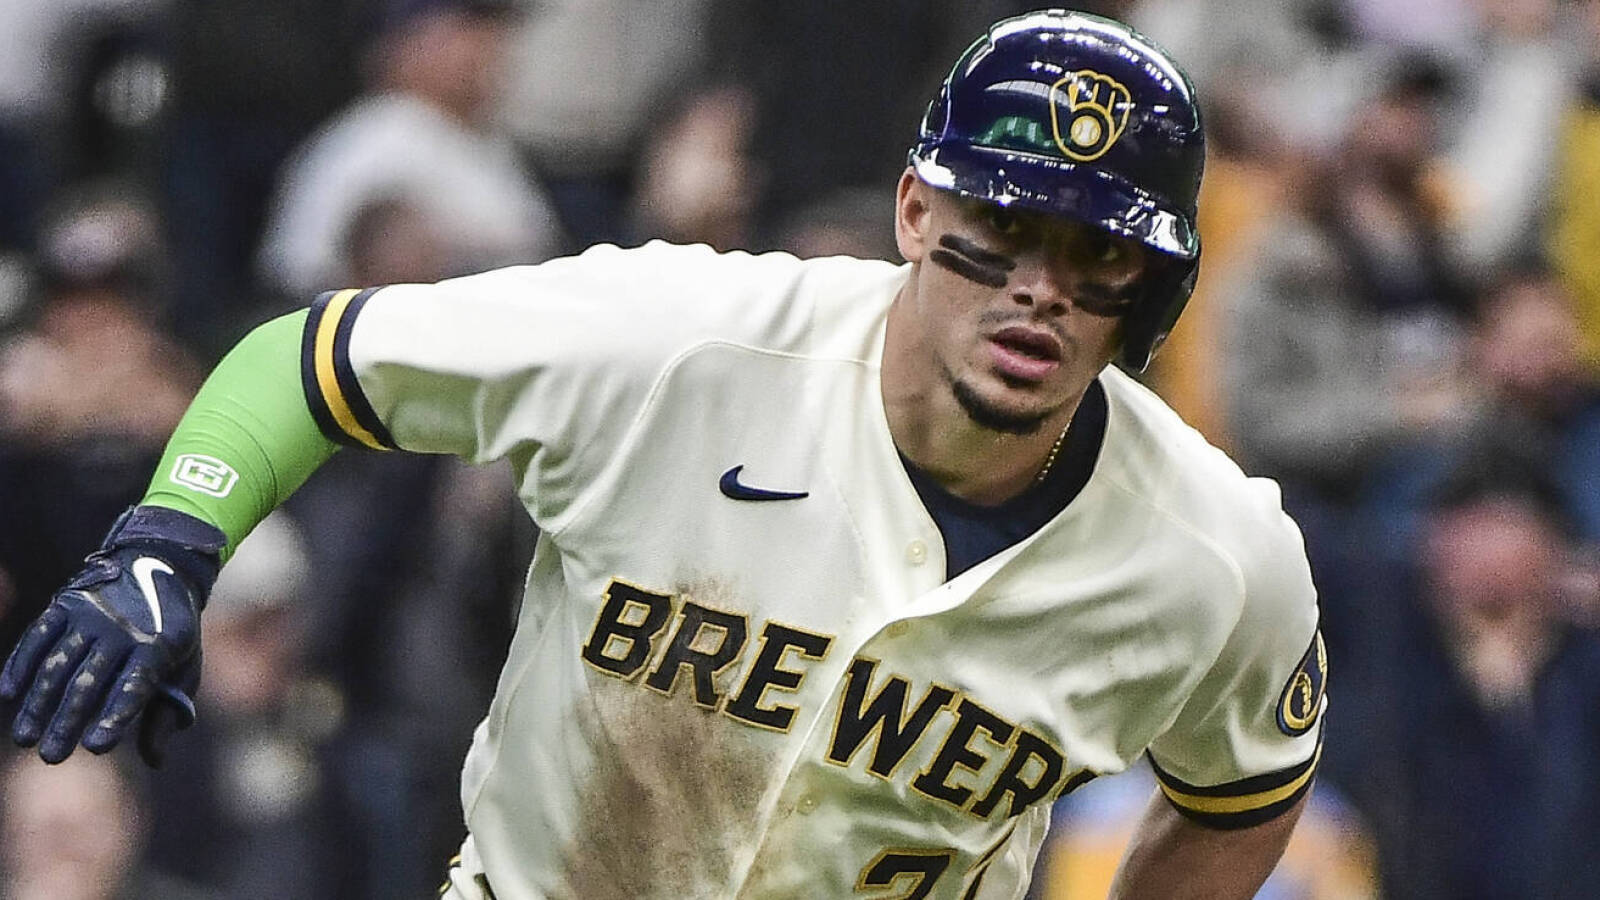 Willy Adames enjoyed his first taste of the Brewers-Cubs rivalry